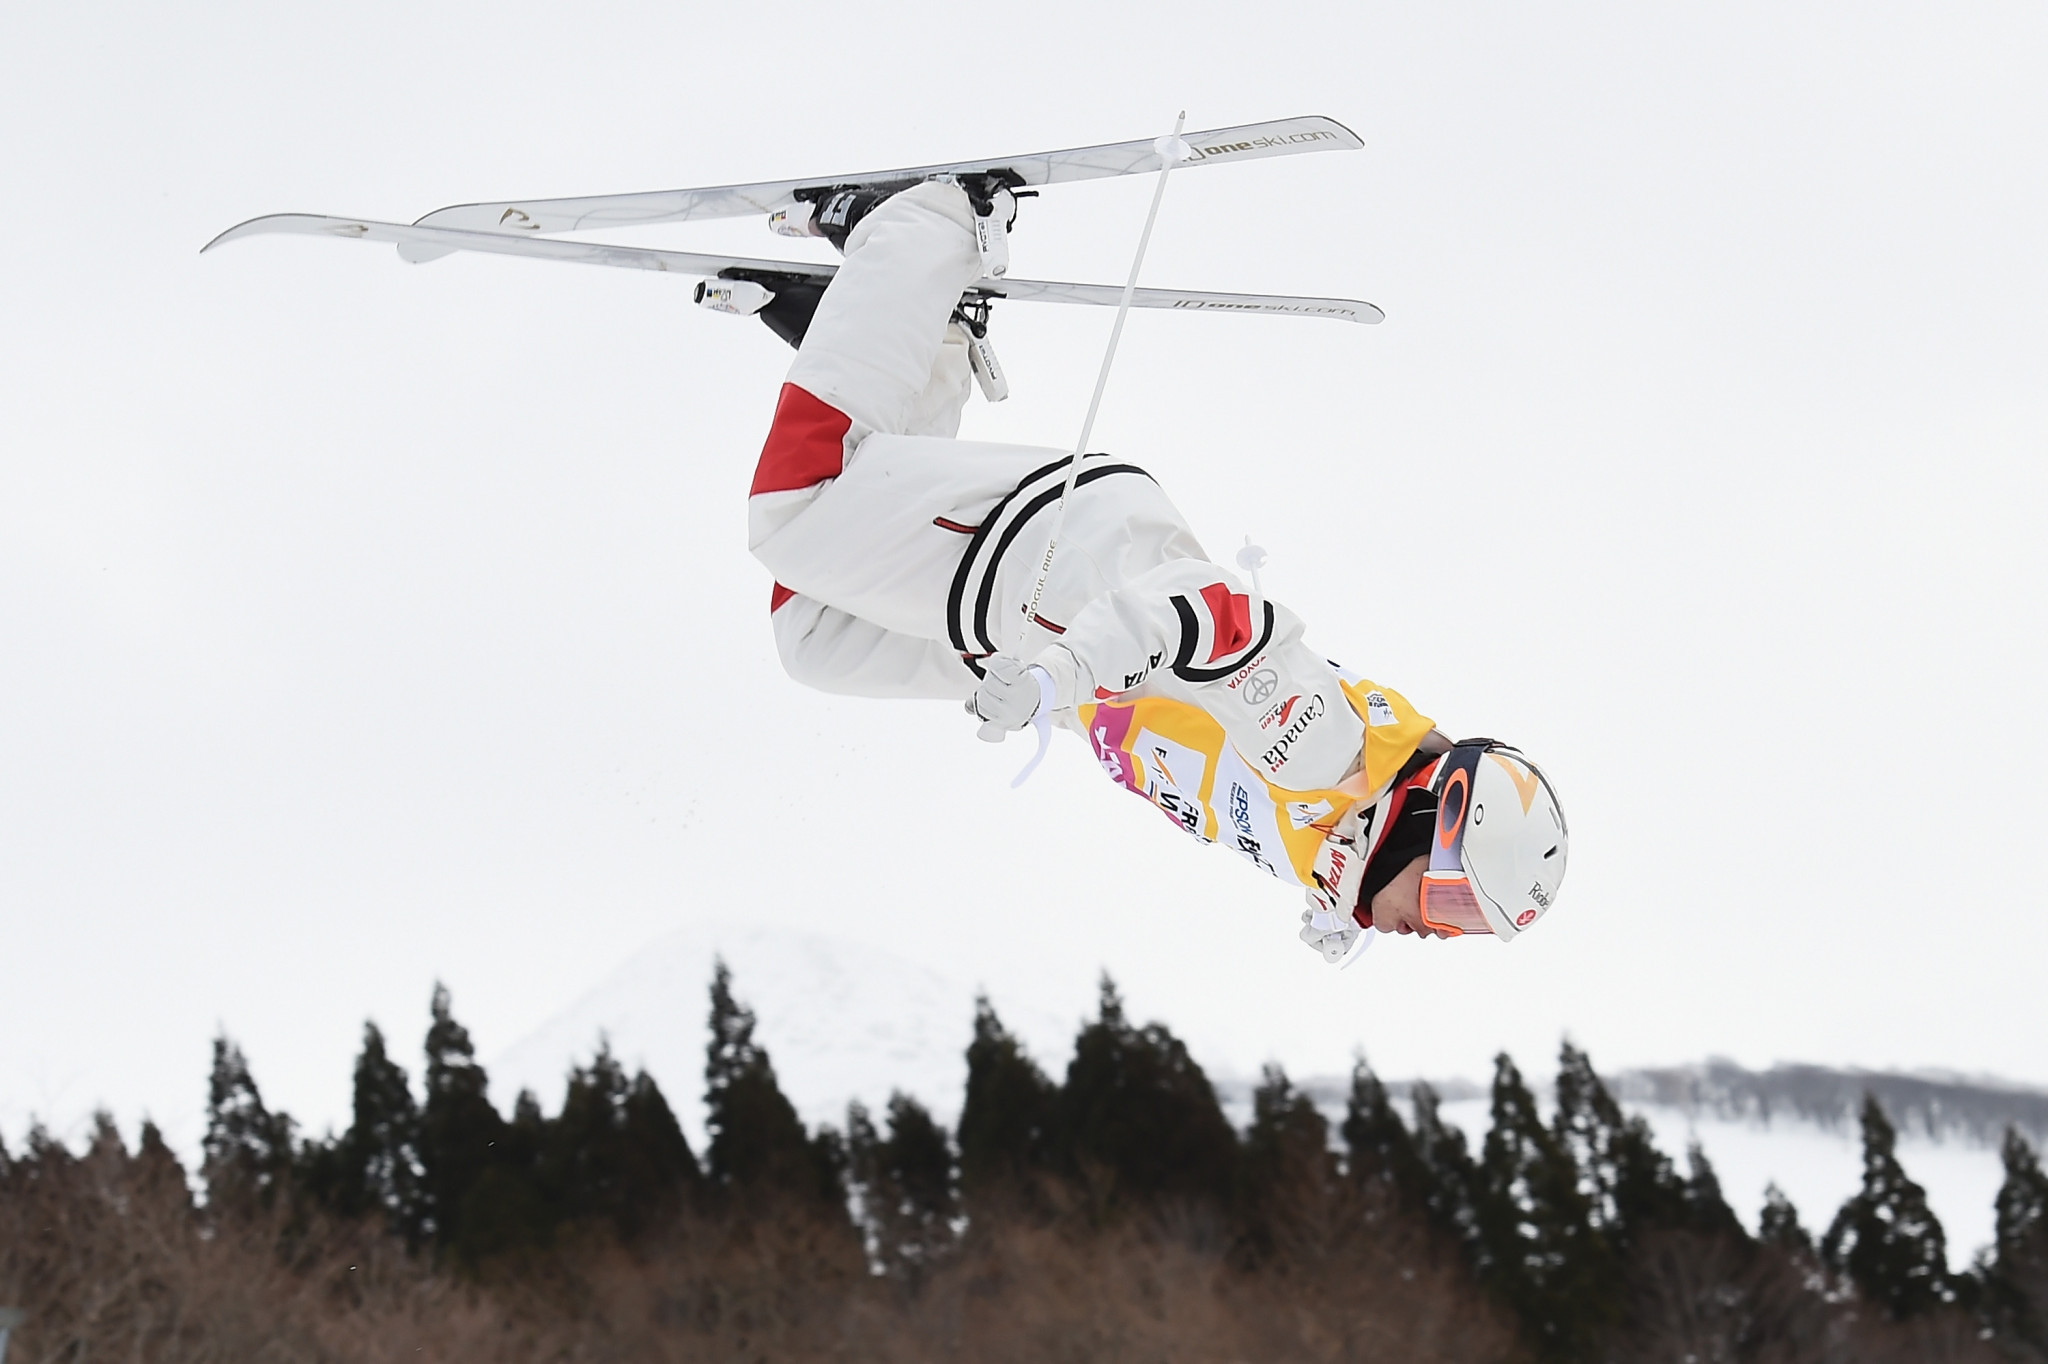 Beijing 2022 Olympic venue ready to host FIS Freestyle Skiing Moguls World Cup